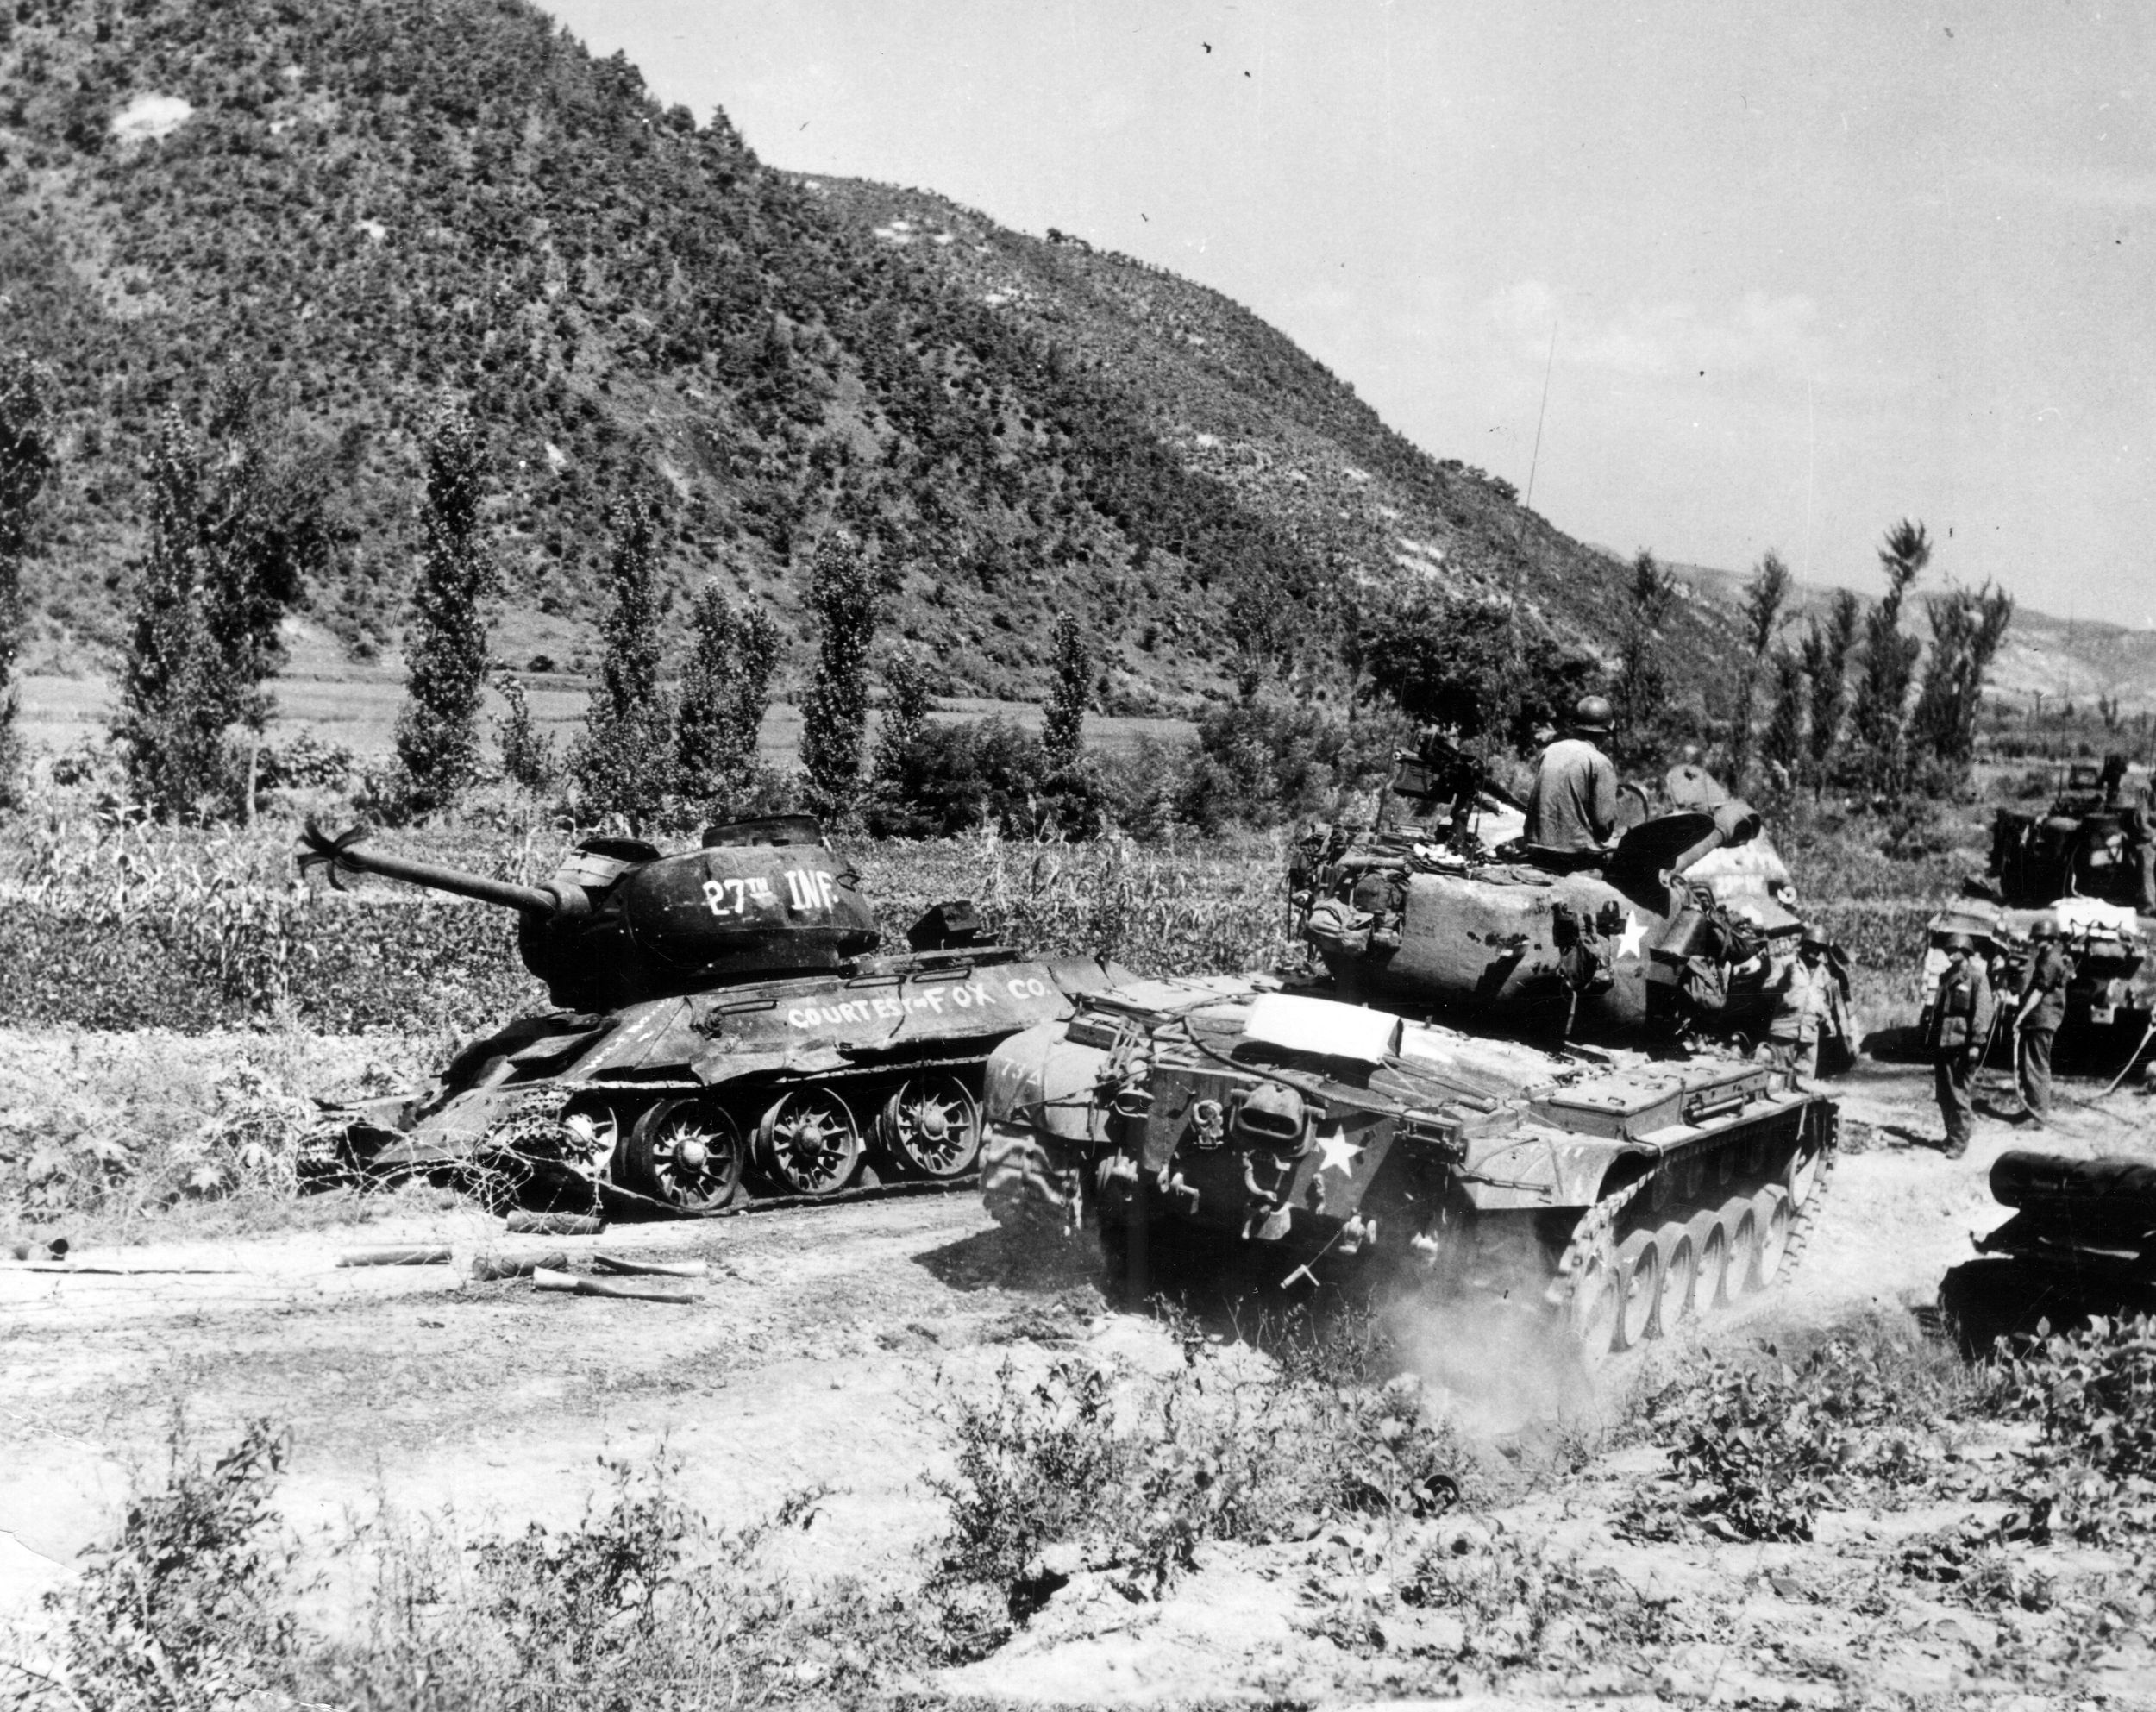 An American M-26 Pershing tank of the 89th Medium Tank Battalion passes a Russian-made North Korean tank destroyed by Fox Company of the U.S. Army’s 27th Infantry Division during the retreat of North Korean forces in August 1950.